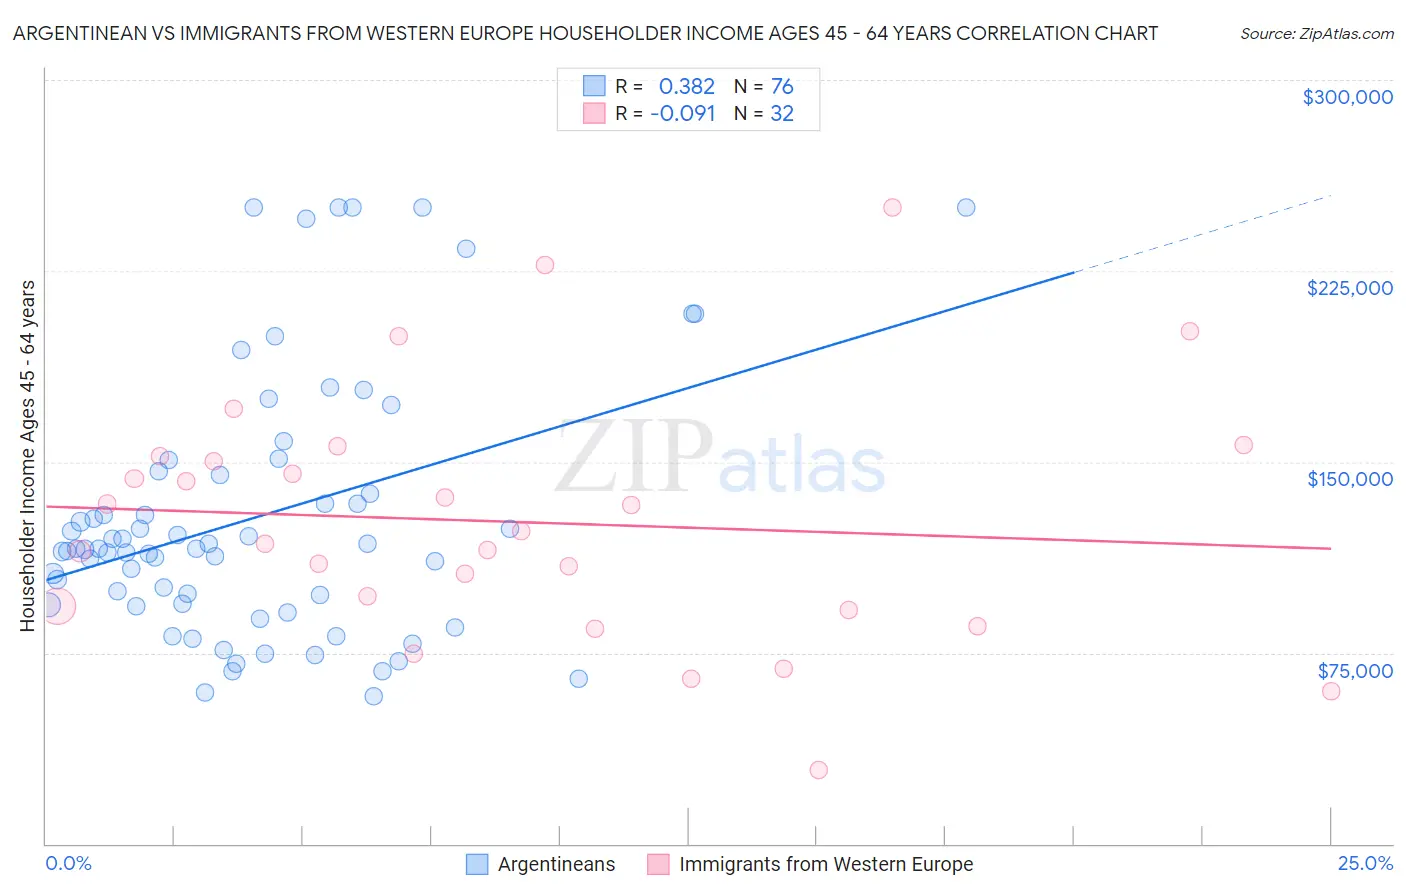 Argentinean vs Immigrants from Western Europe Householder Income Ages 45 - 64 years